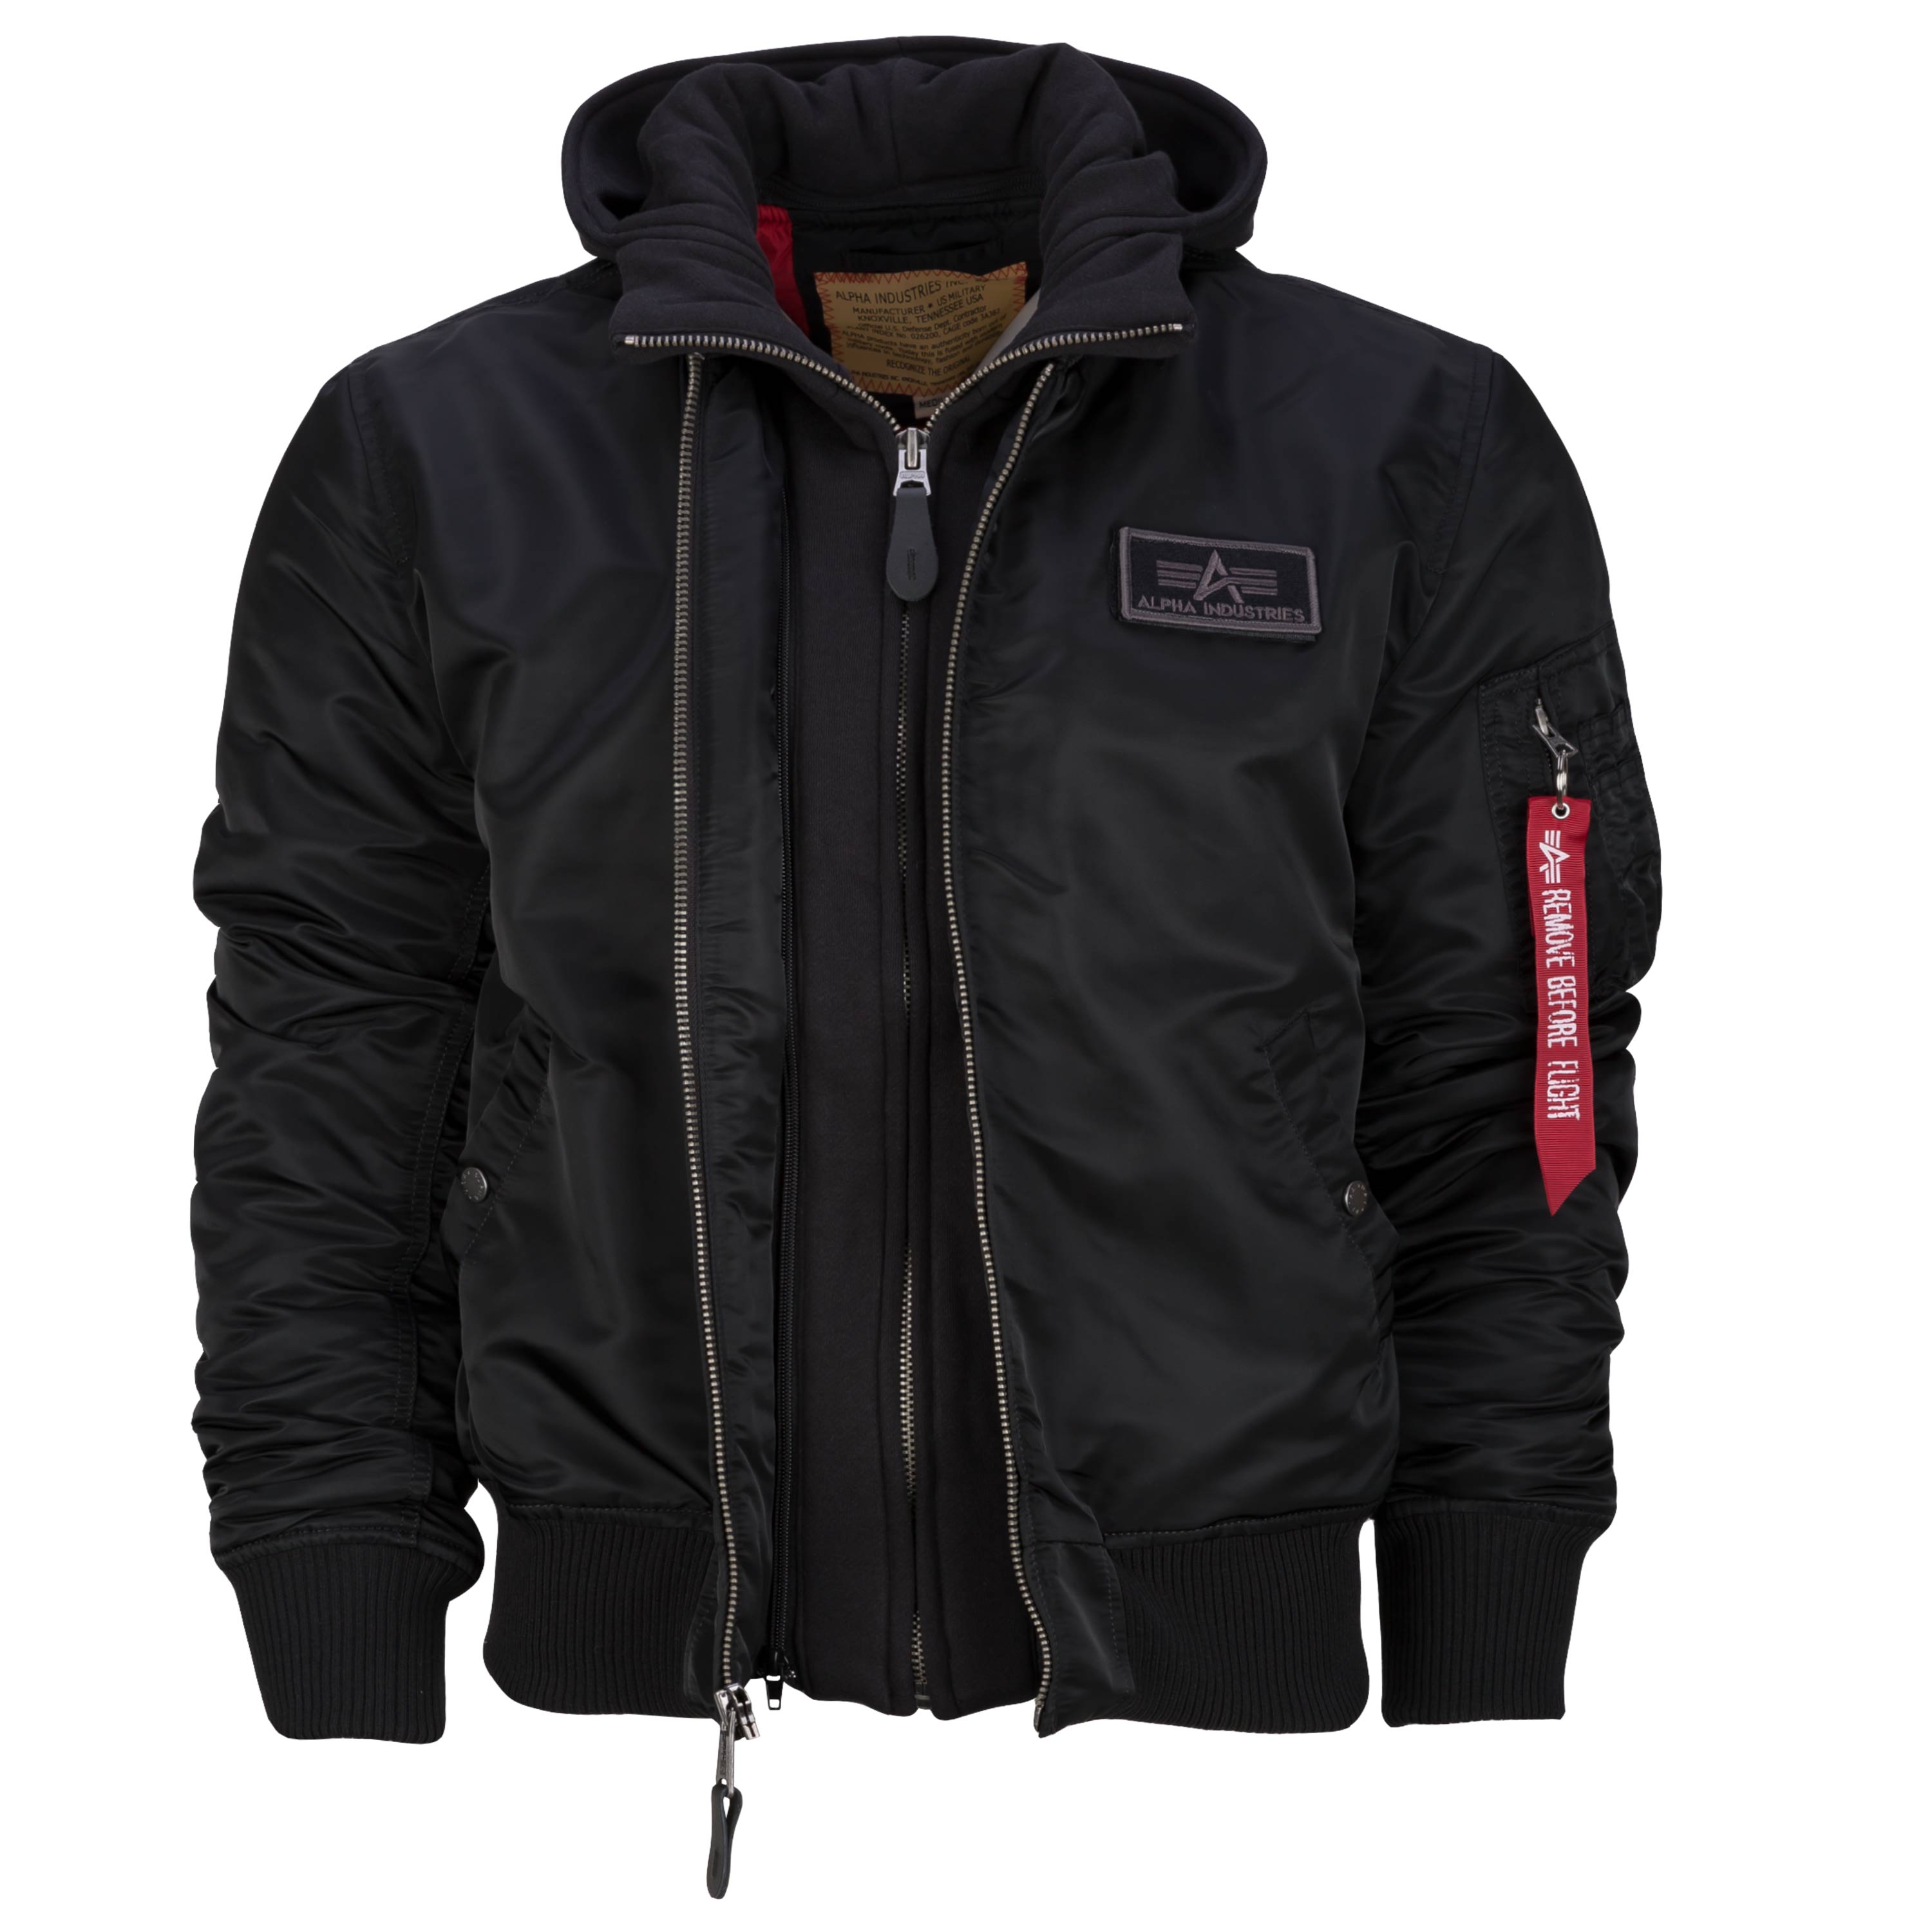 Purchase the Alpha Industries D-Tec MA-1 II ASMC black Jacket by